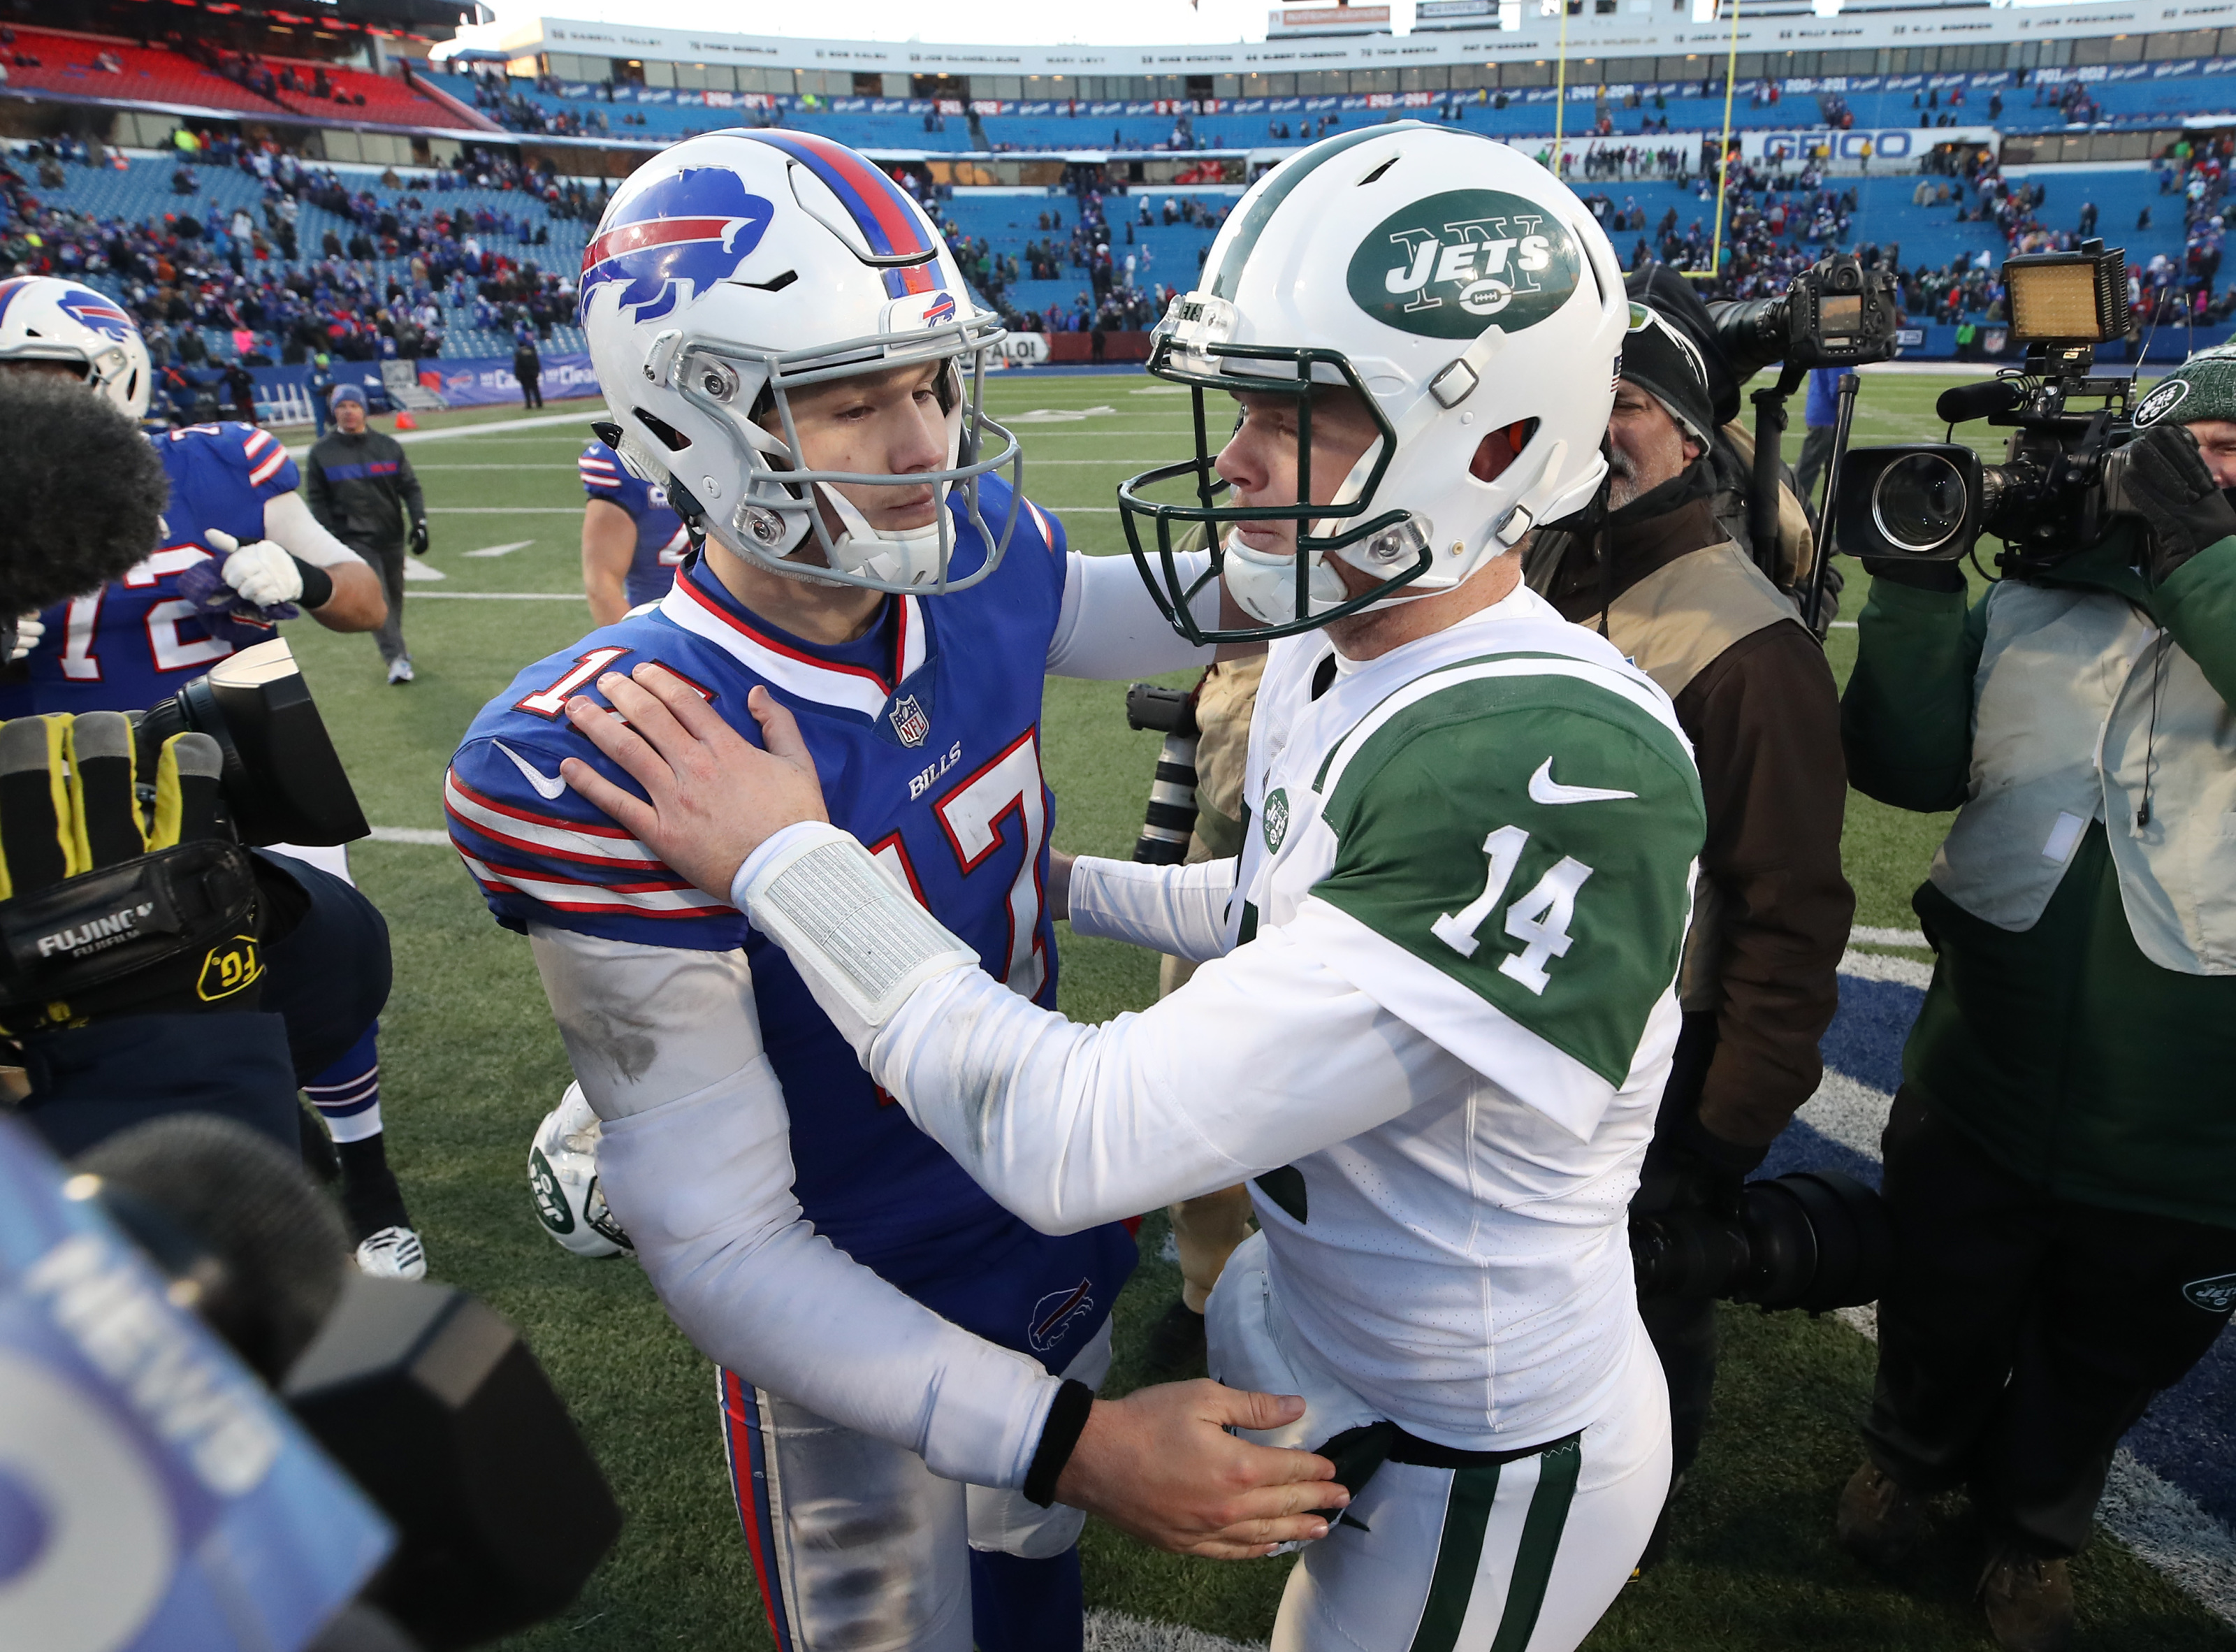 How to watch Jets vs. Bills: Live stream, TV channel, start time for  Sunday's NFL game 